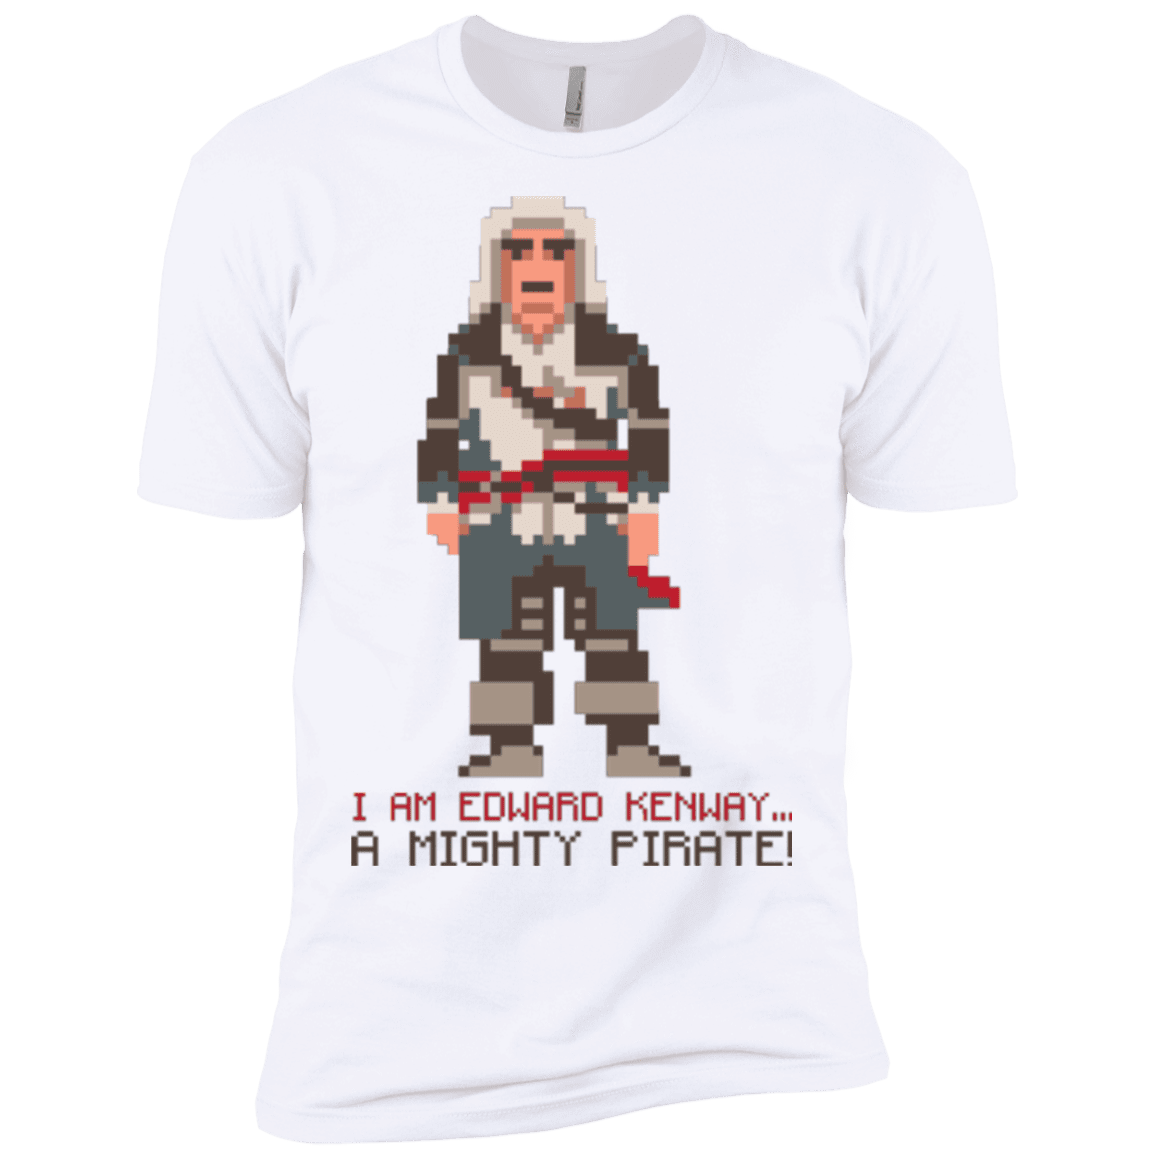 T-Shirts White / X-Small A Mighty Pirate Men's Premium T-Shirt